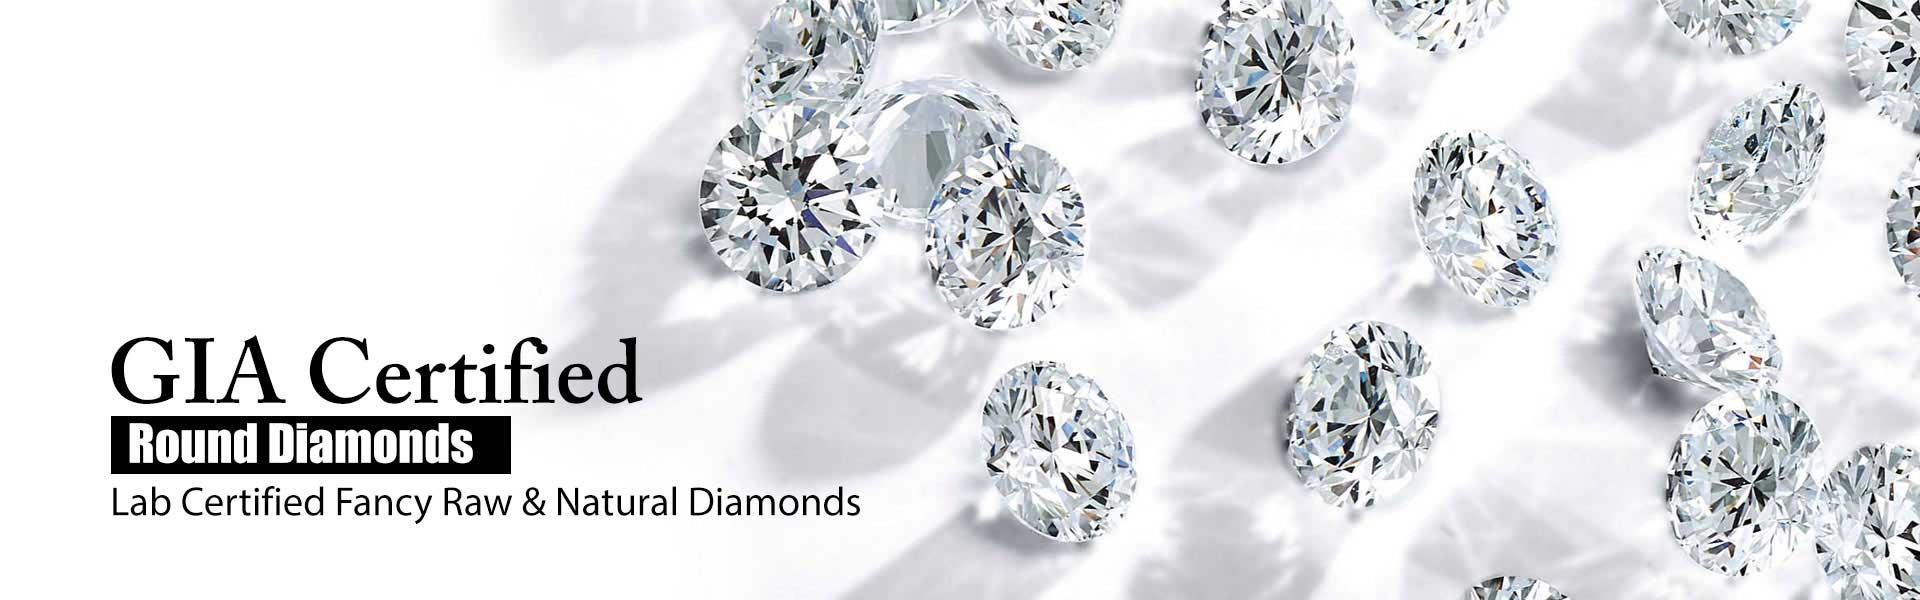  Certified Diamond  Manufacturers in Brussels